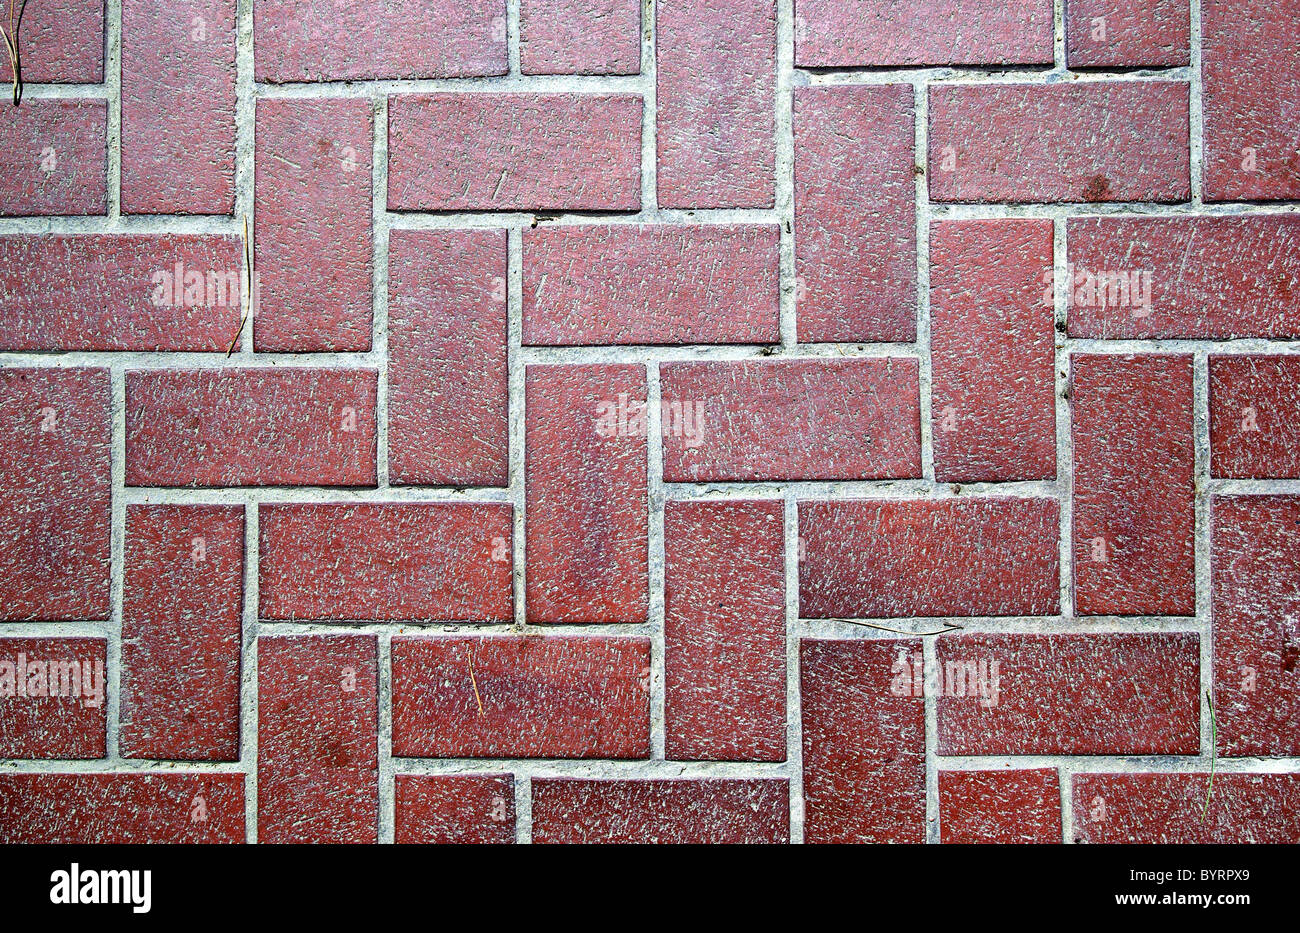 Floor tiled with red bricks. Good as backdrop or background. Stock Photo